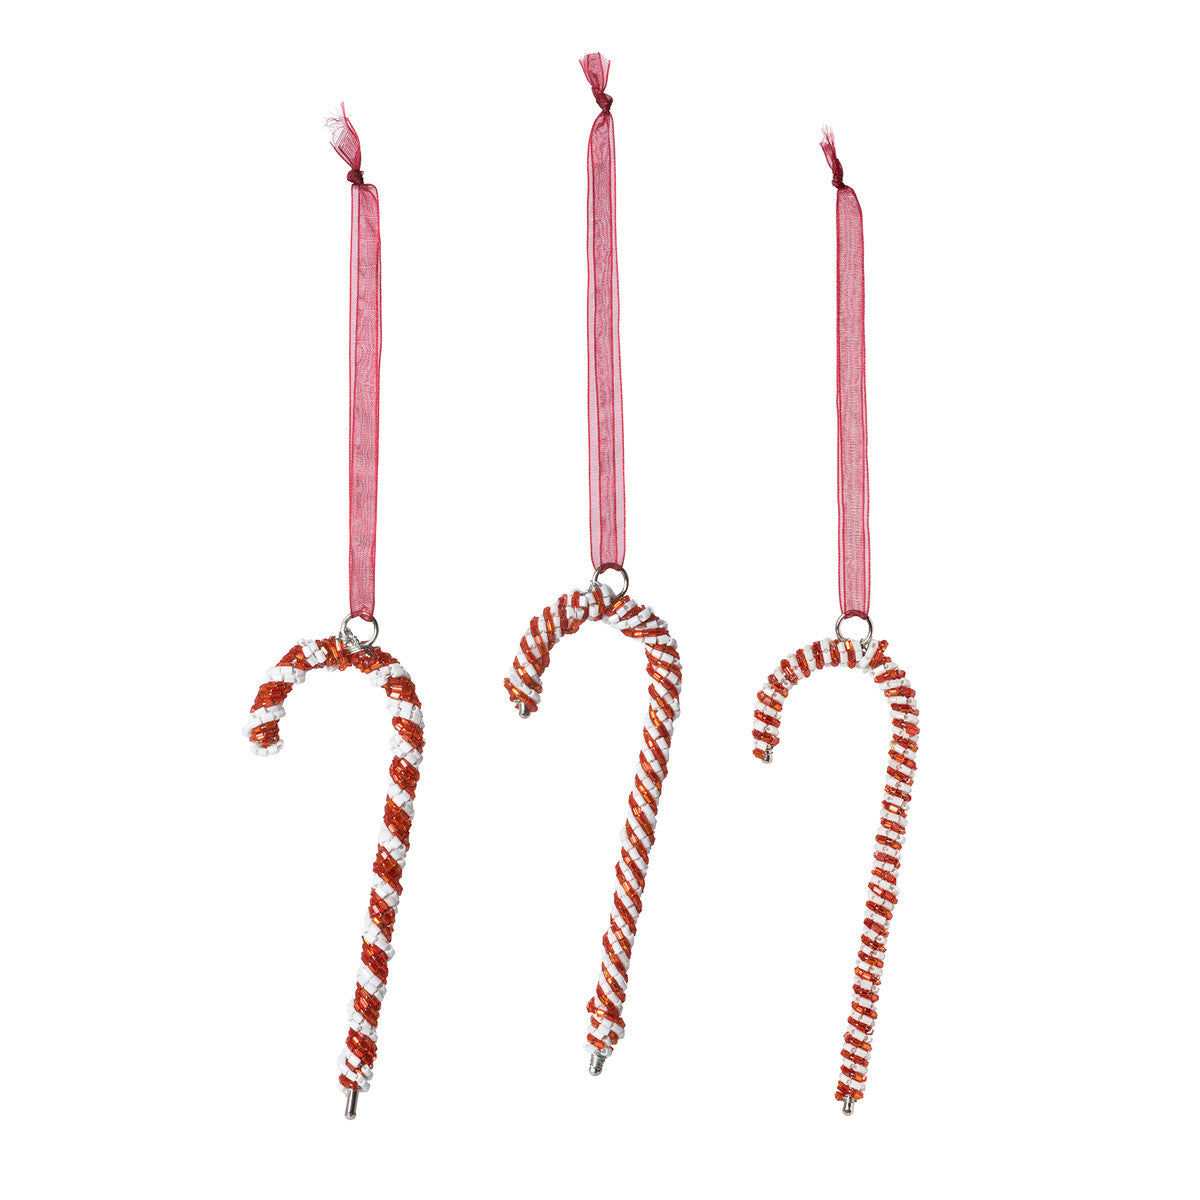 Beaded Candy Cane Ornament